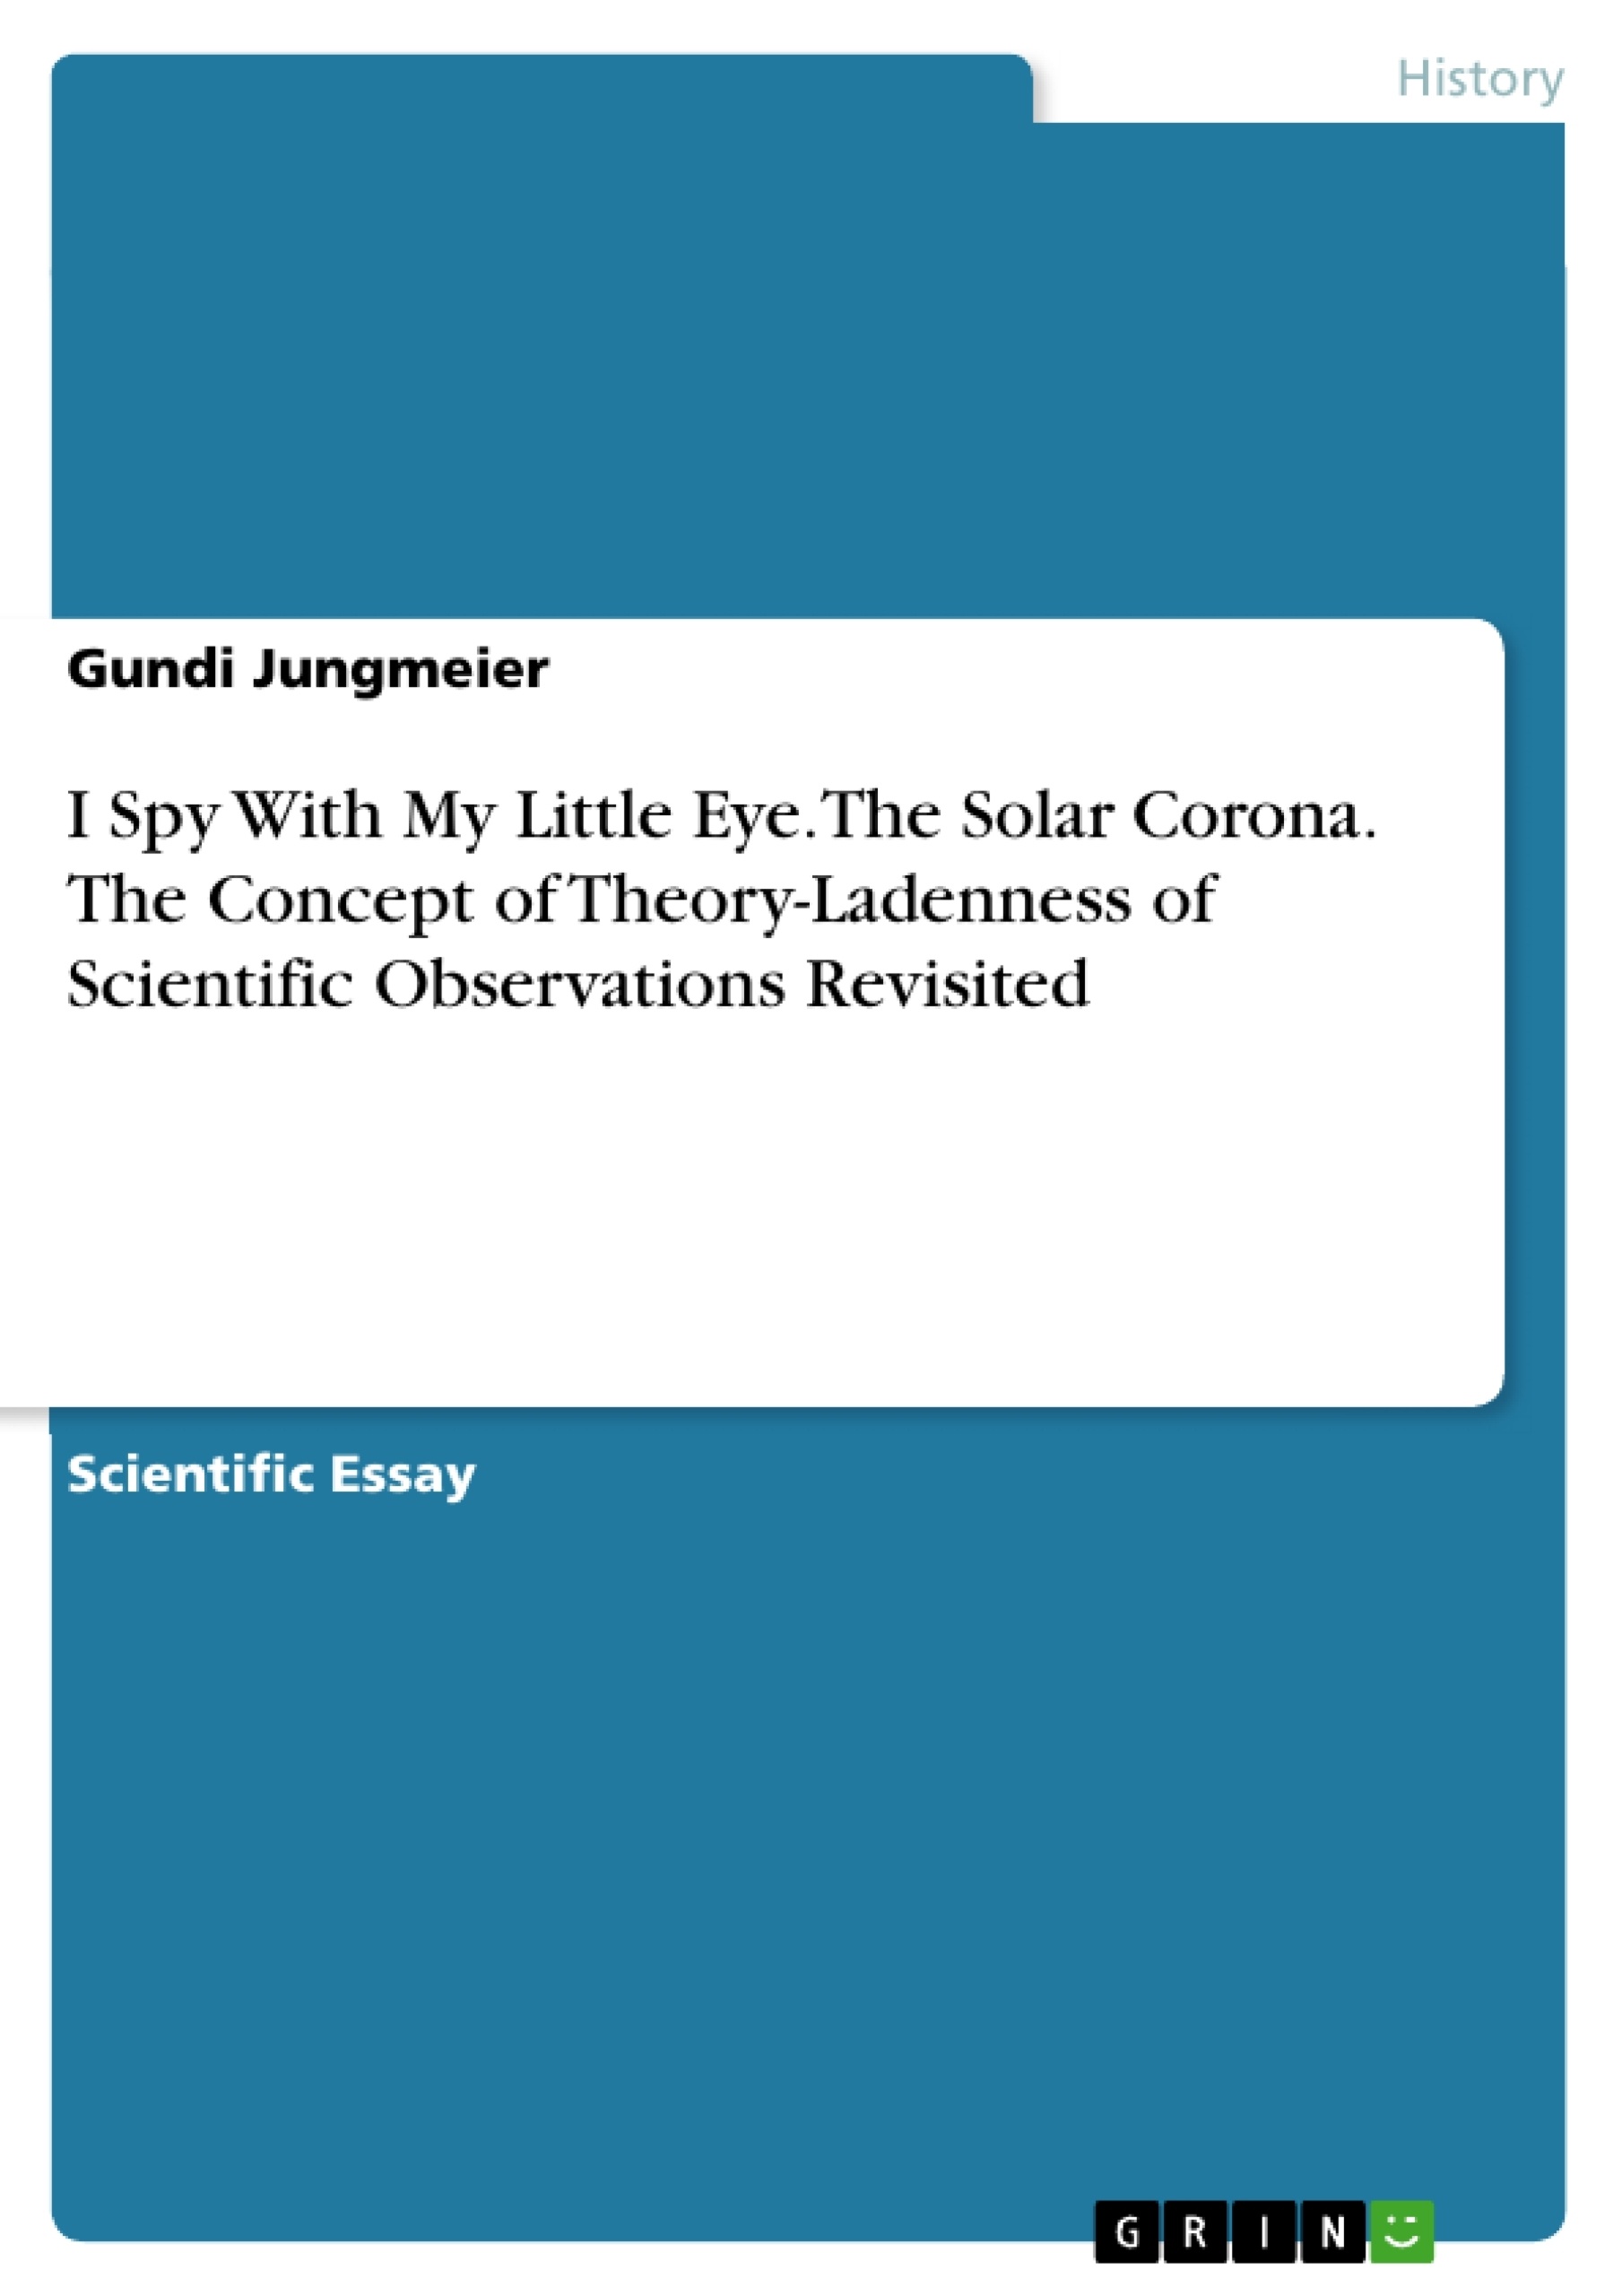 Título: I Spy With My Little Eye. The Solar Corona. The Concept of Theory-Ladenness of Scientific Observations Revisited